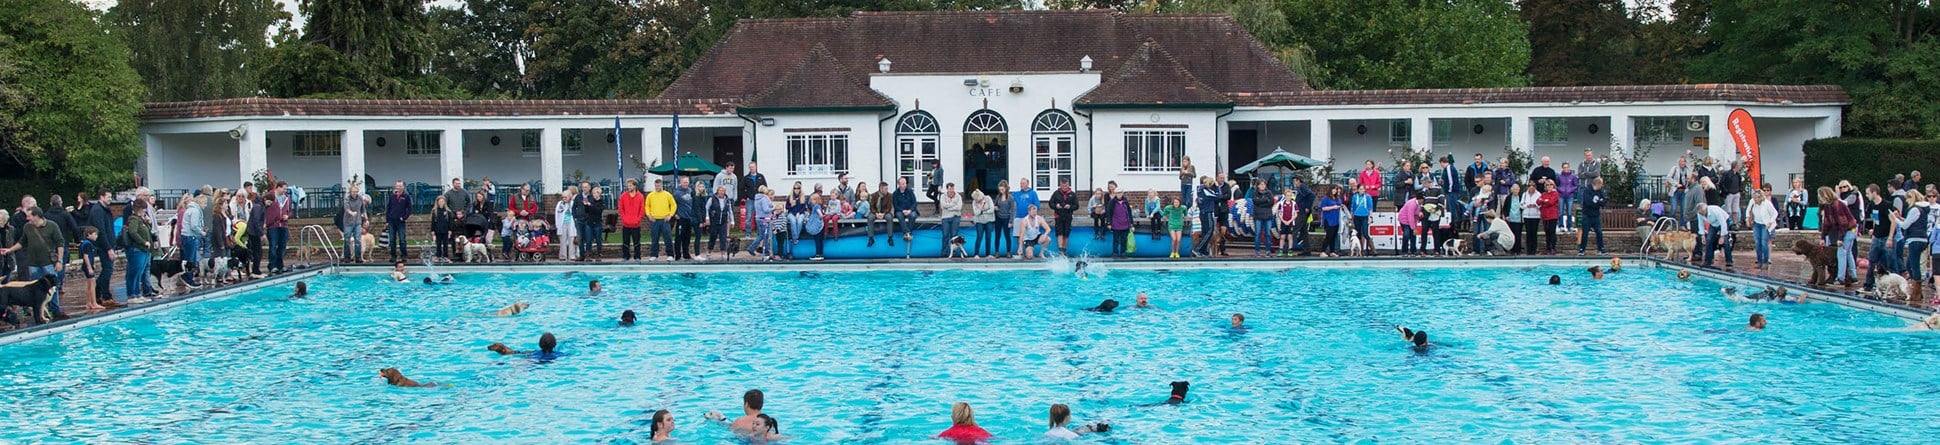 People and dogs swimming in an outdoor swimming pool